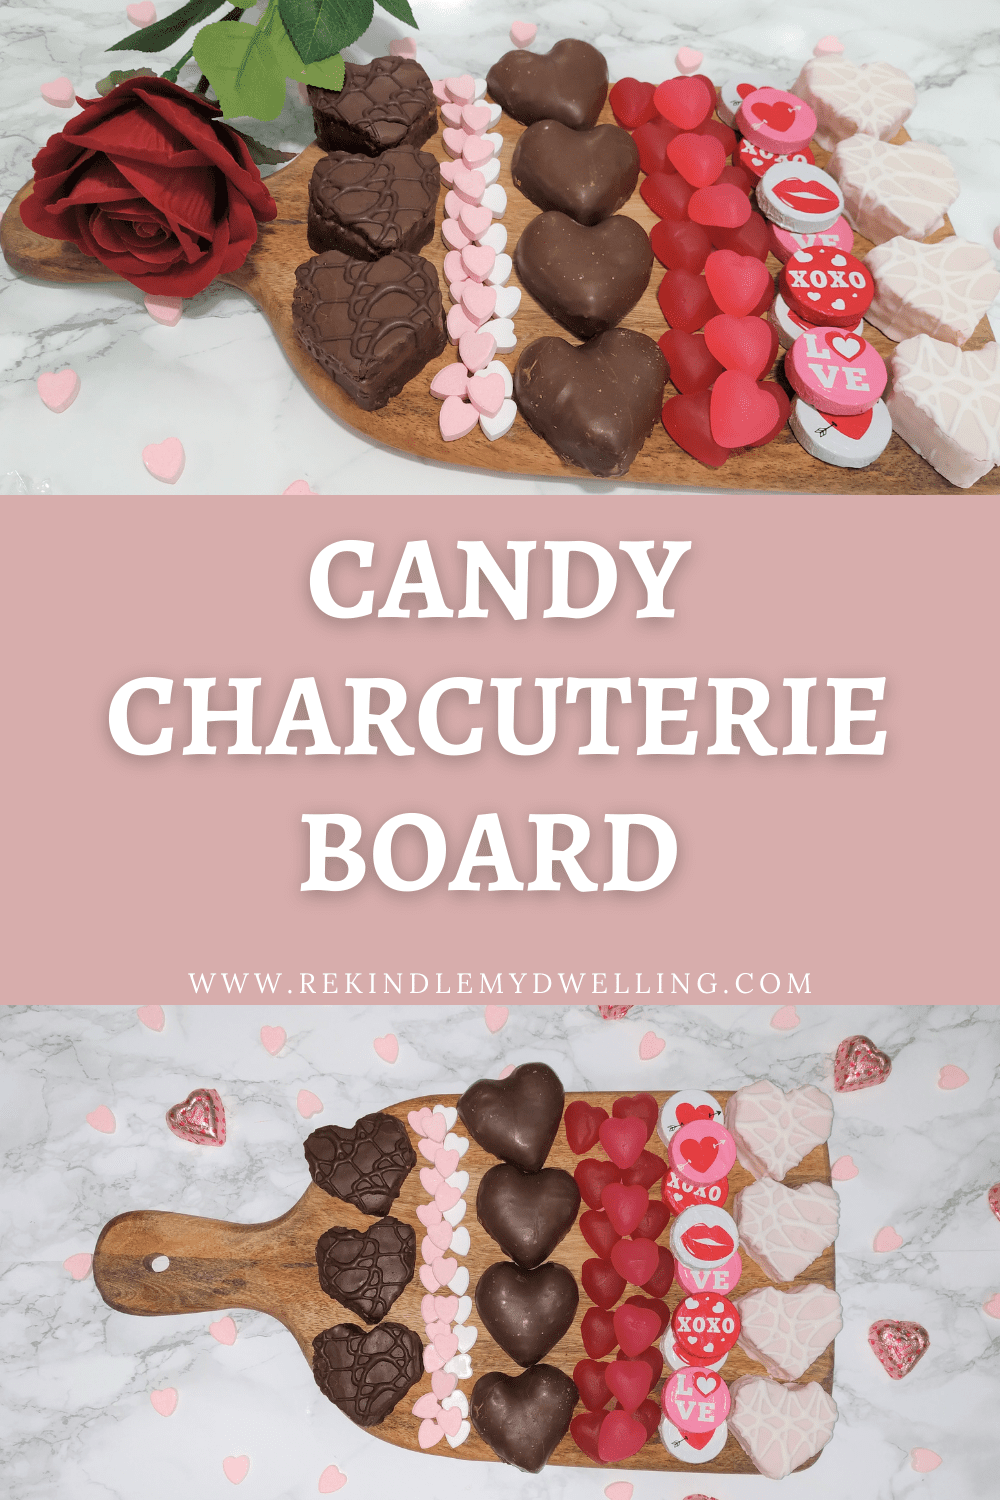 Collage image of candy charcuterie boards with text overlay.